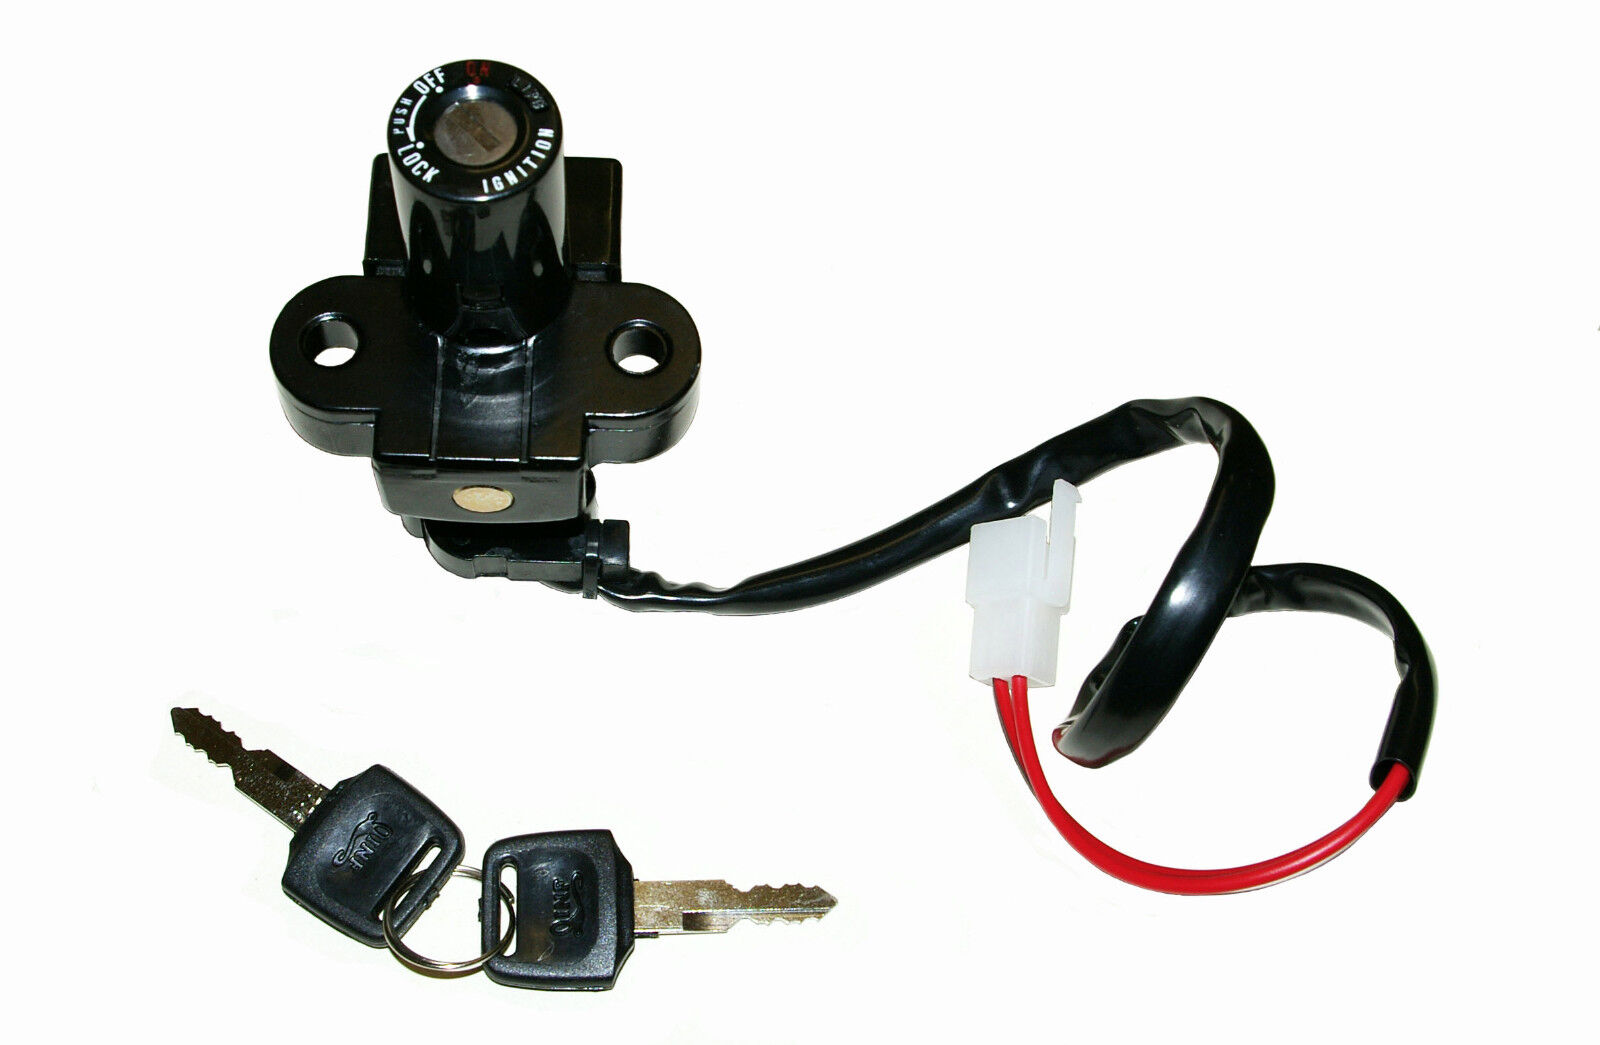 Ignition Switch for 2004 Honda XR 125 L4